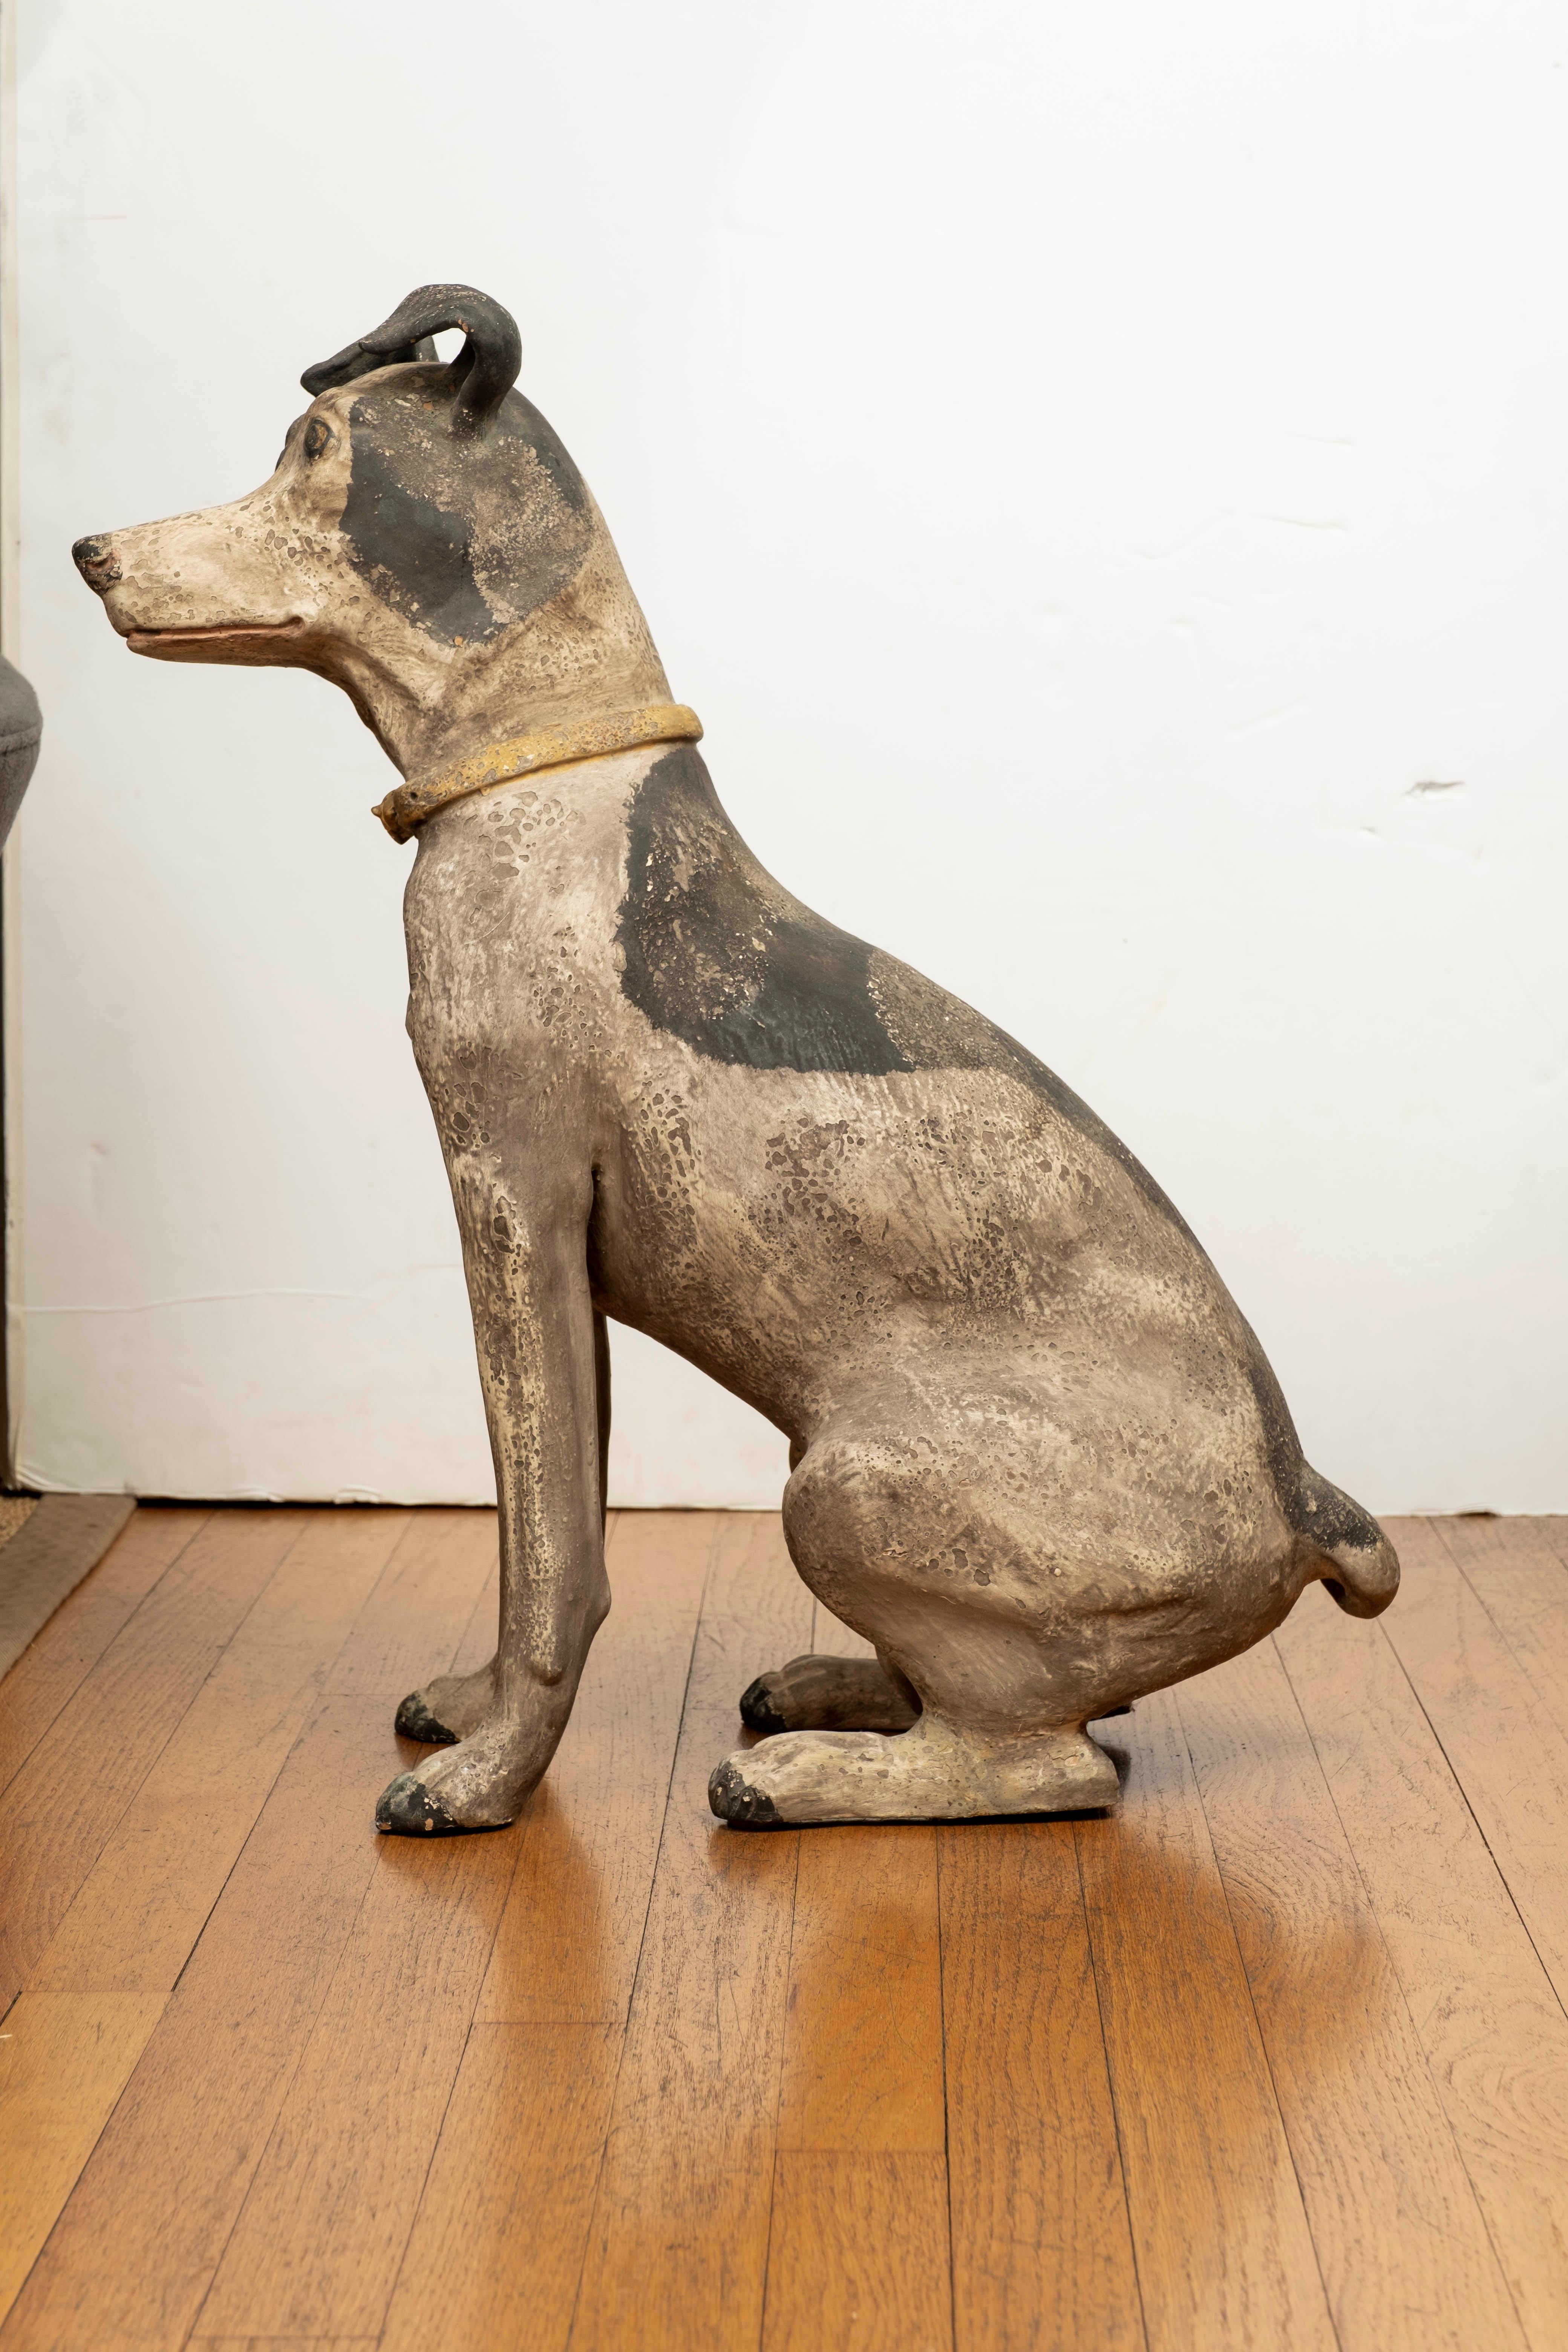 Vintage terracotta dog sculpture. This handsome terracotta dog sculpture or dog figure is realistic in both size and features.
Perfect home accent for the dog lover.